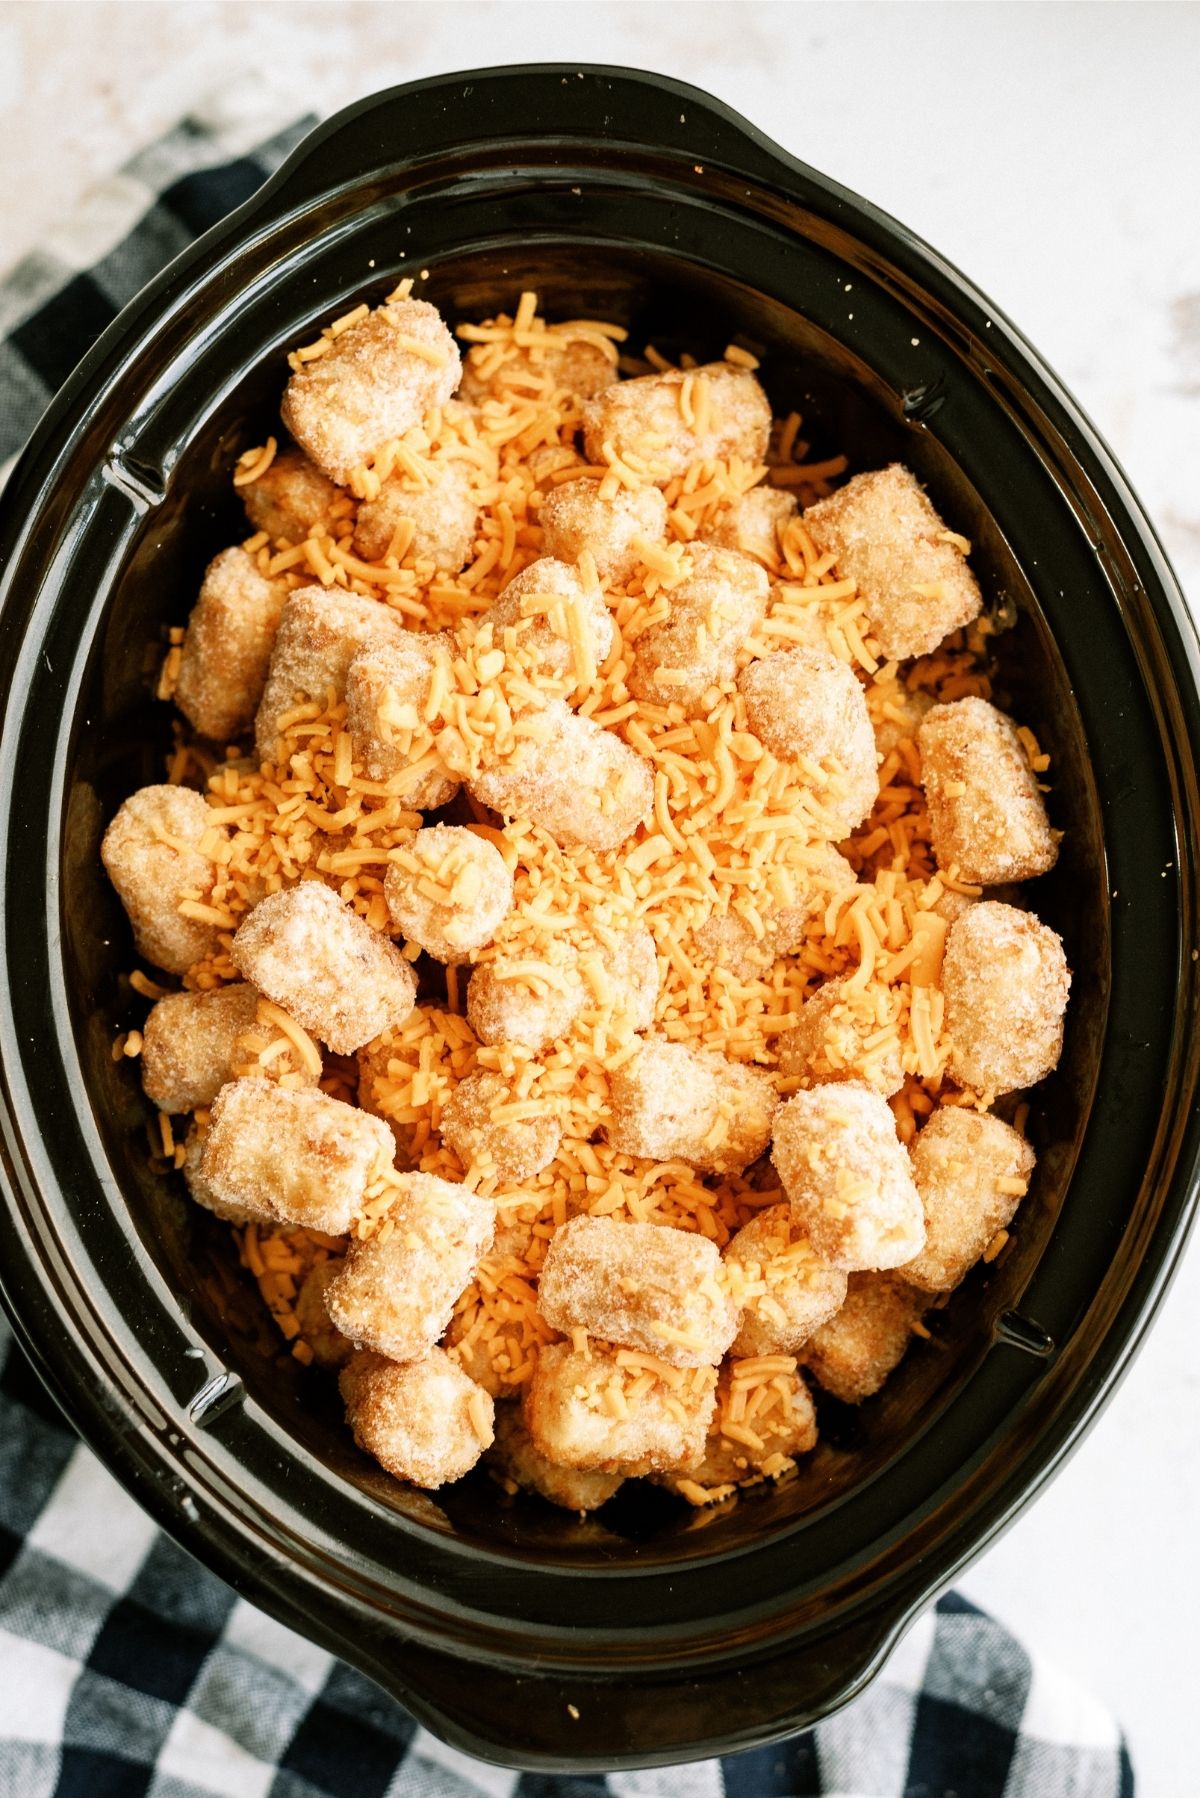 Uncooked Slow Cooker Tater Tot Cowboy Casserole topped with cheese in the slow cooker